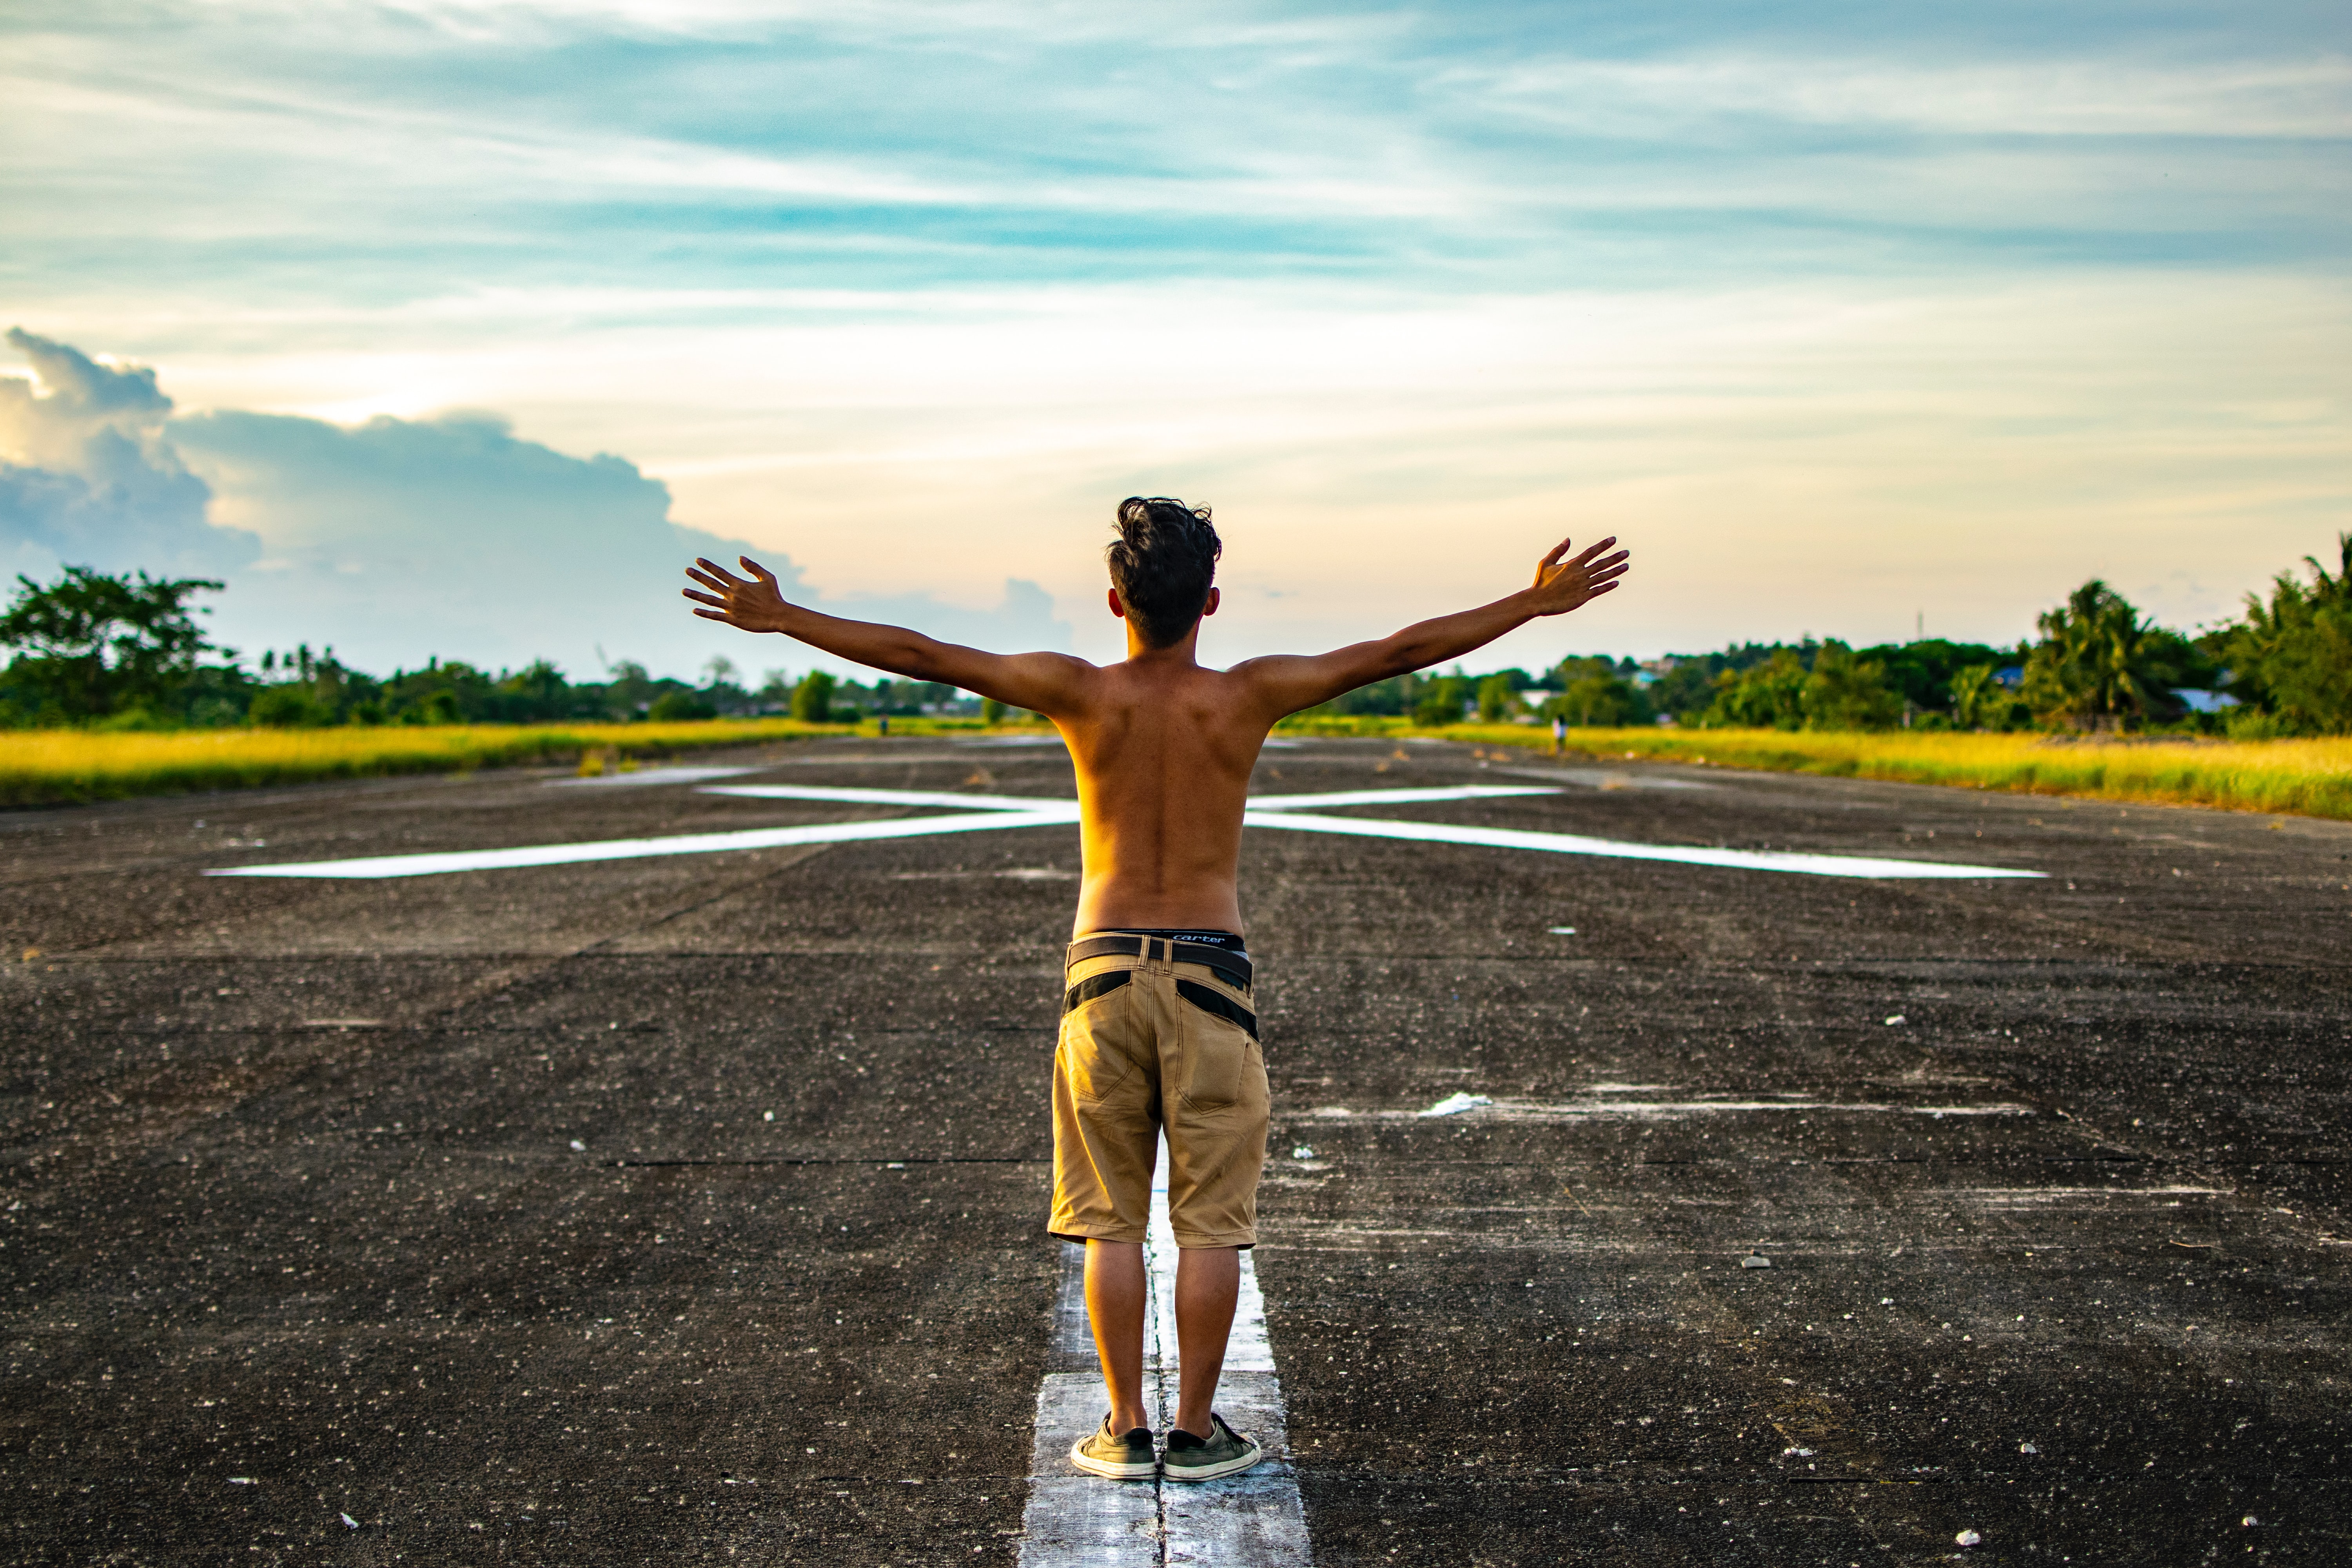 A shirtless guy stands in the middle of a white line on pavement with his arms up in the air.